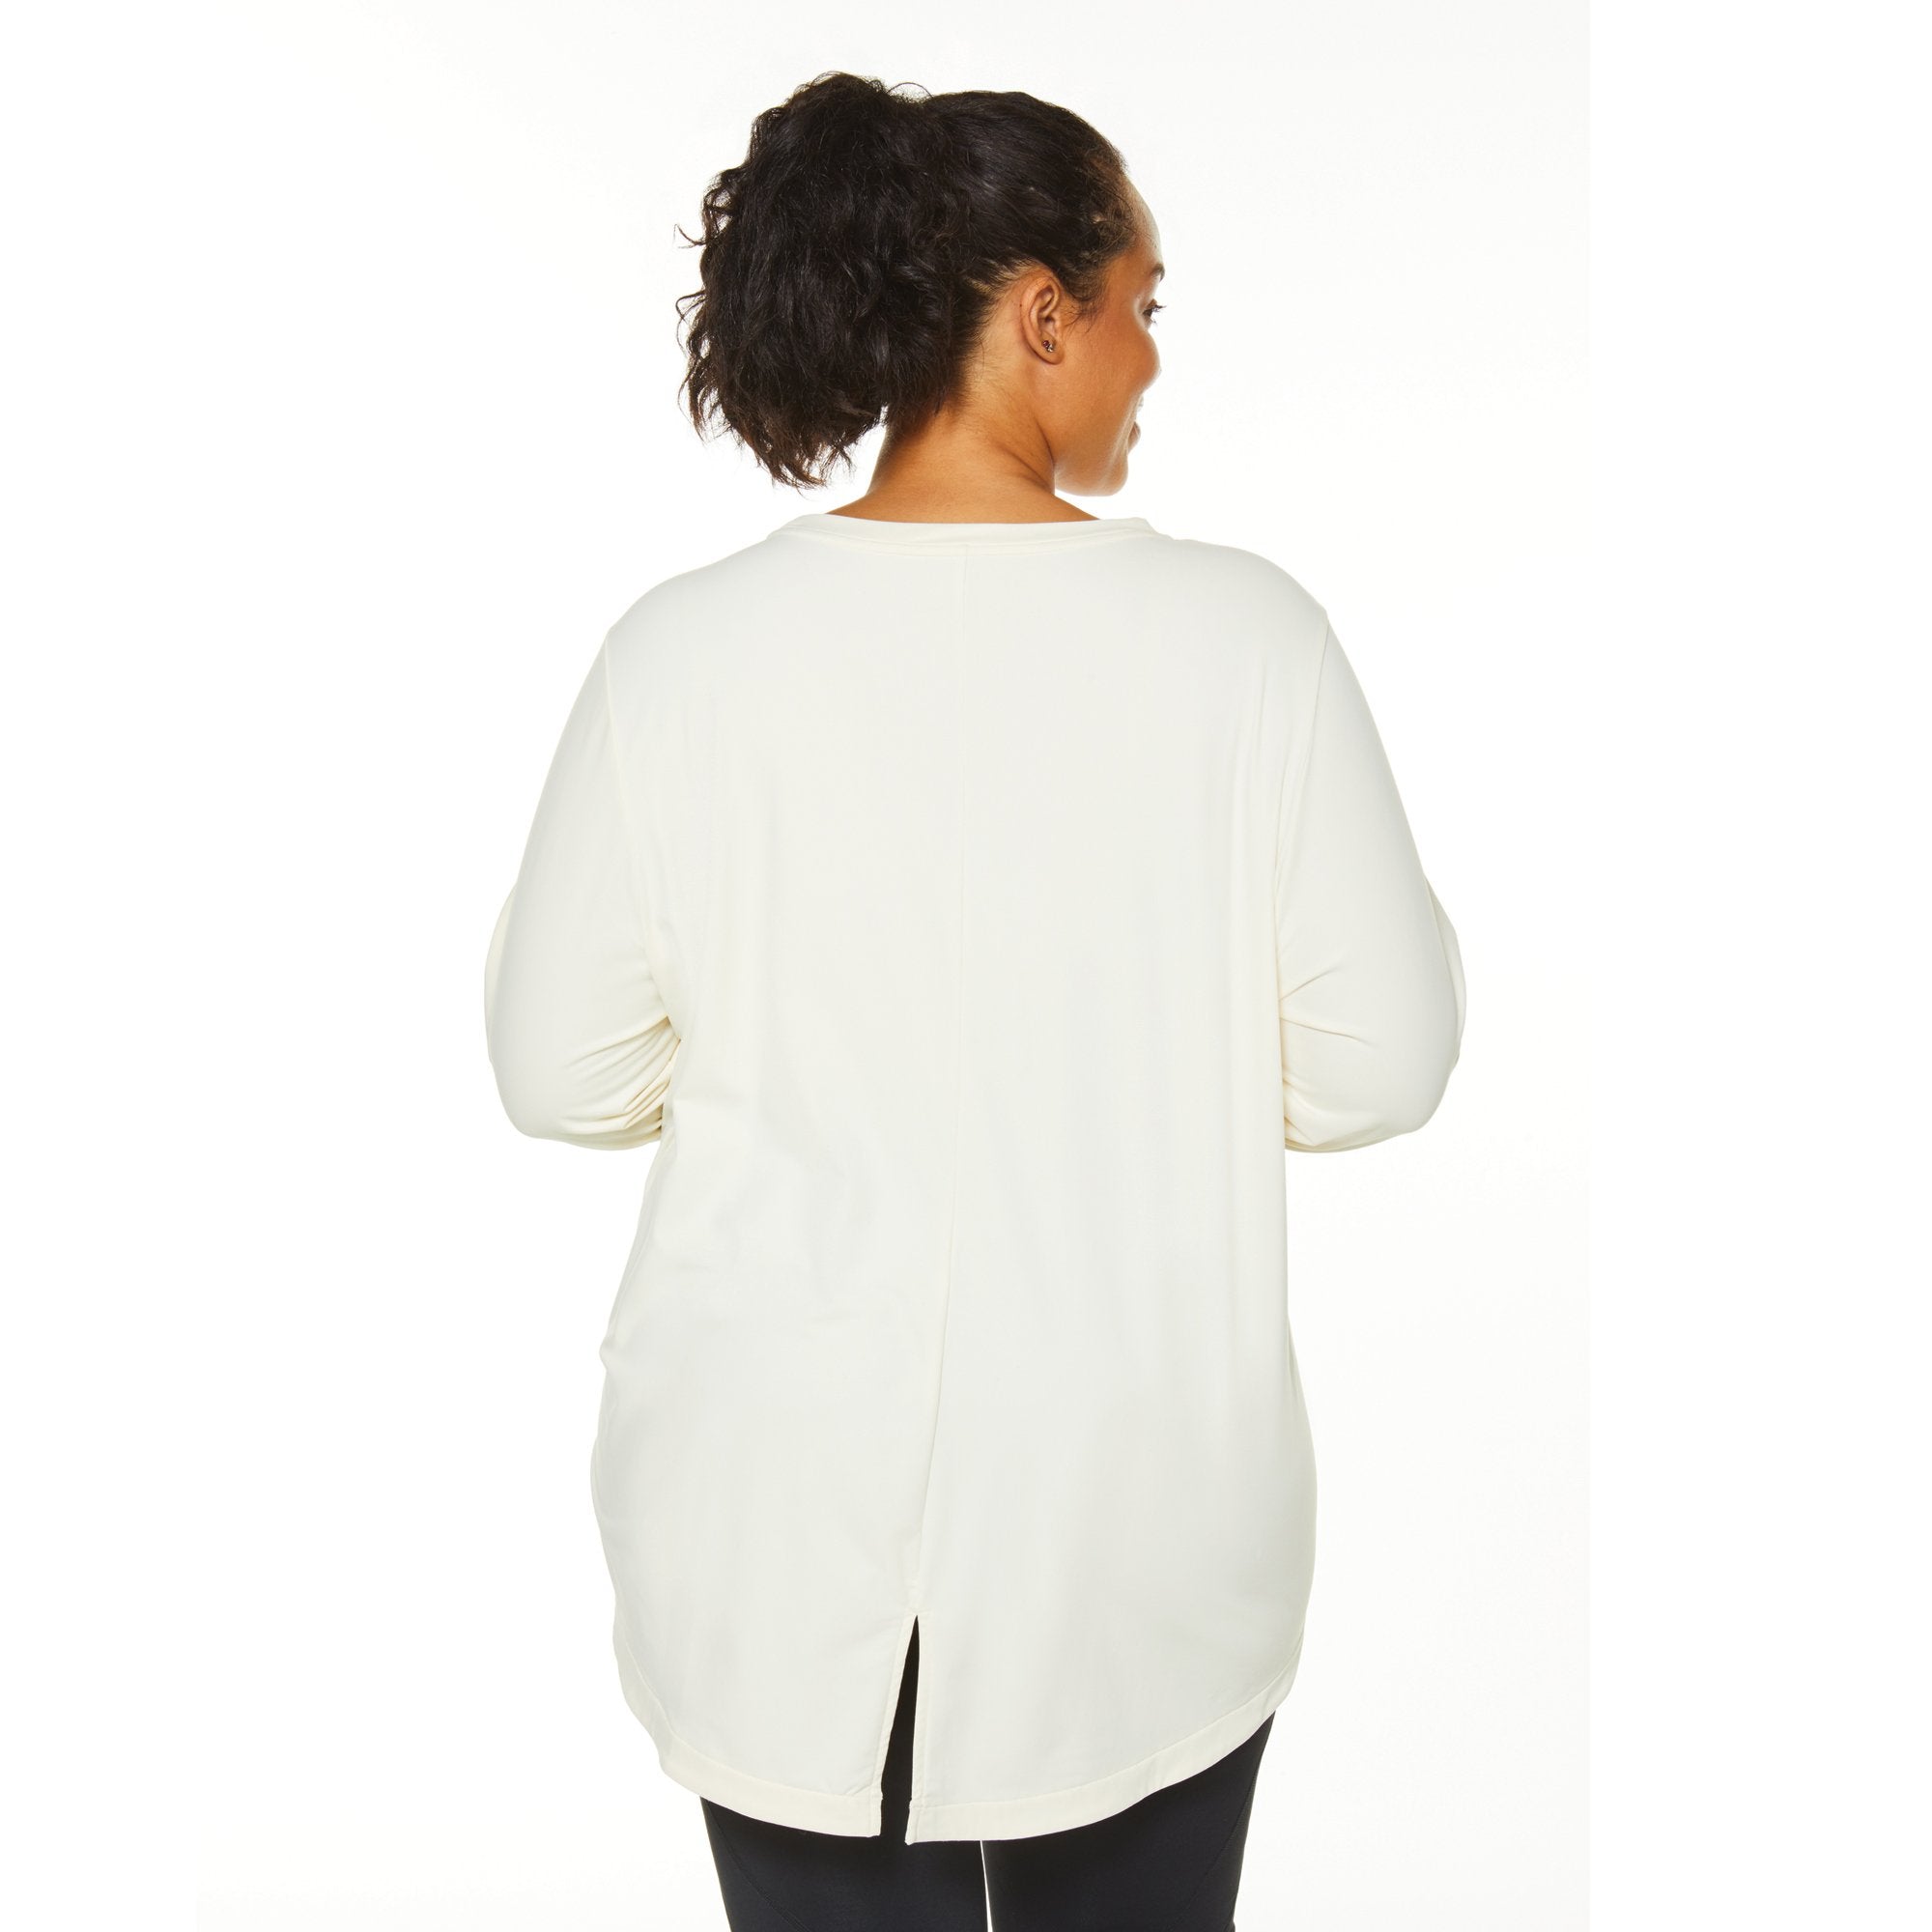 OPT OUT SWEATSHIRT (PLUS SIZE)